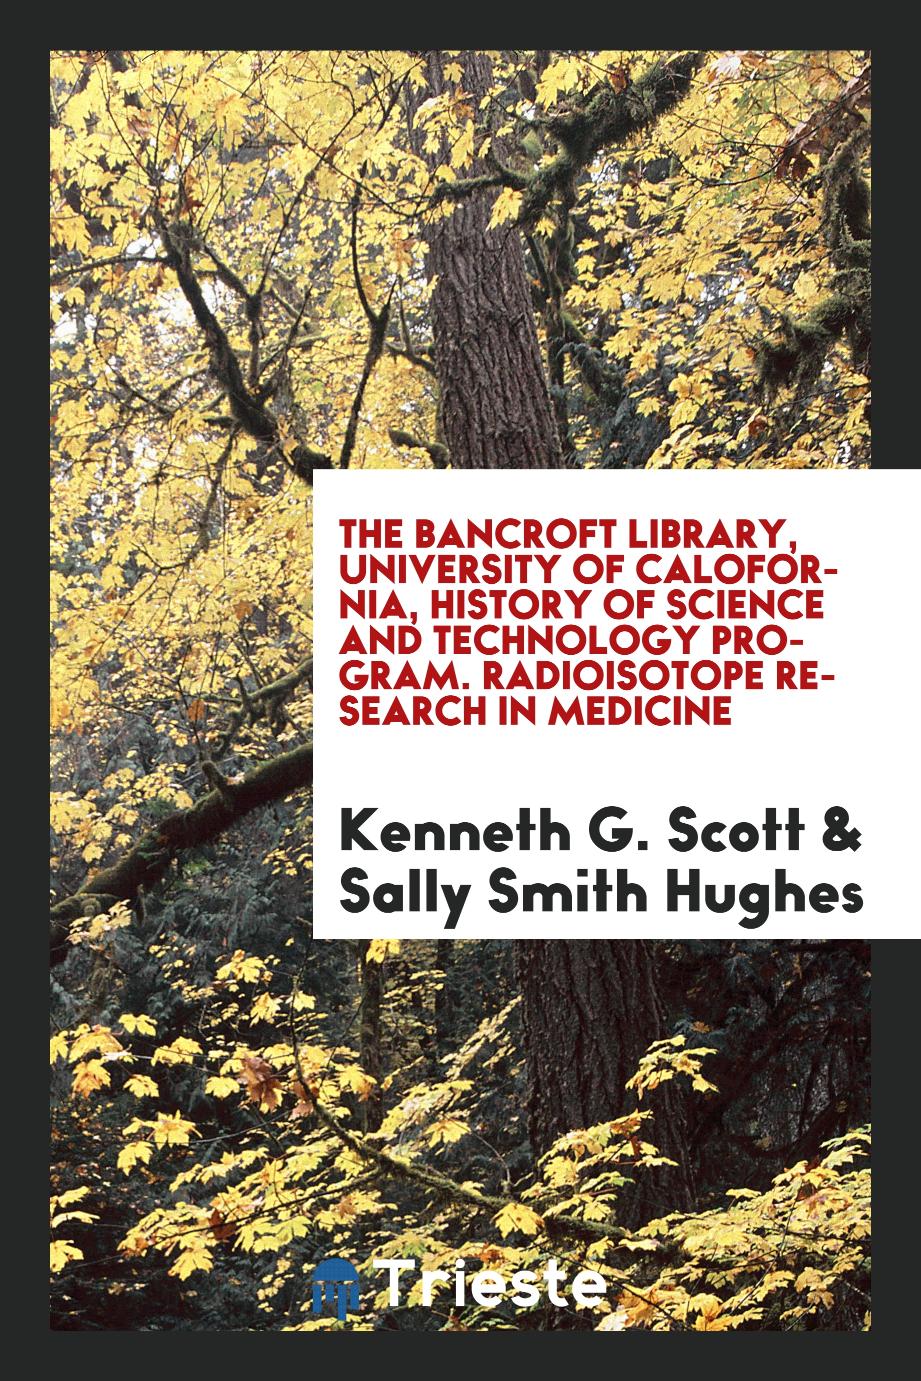 The Bancroft Library, University of Calofornia, History of Science and Technology Program. Radioisotope research in medicine